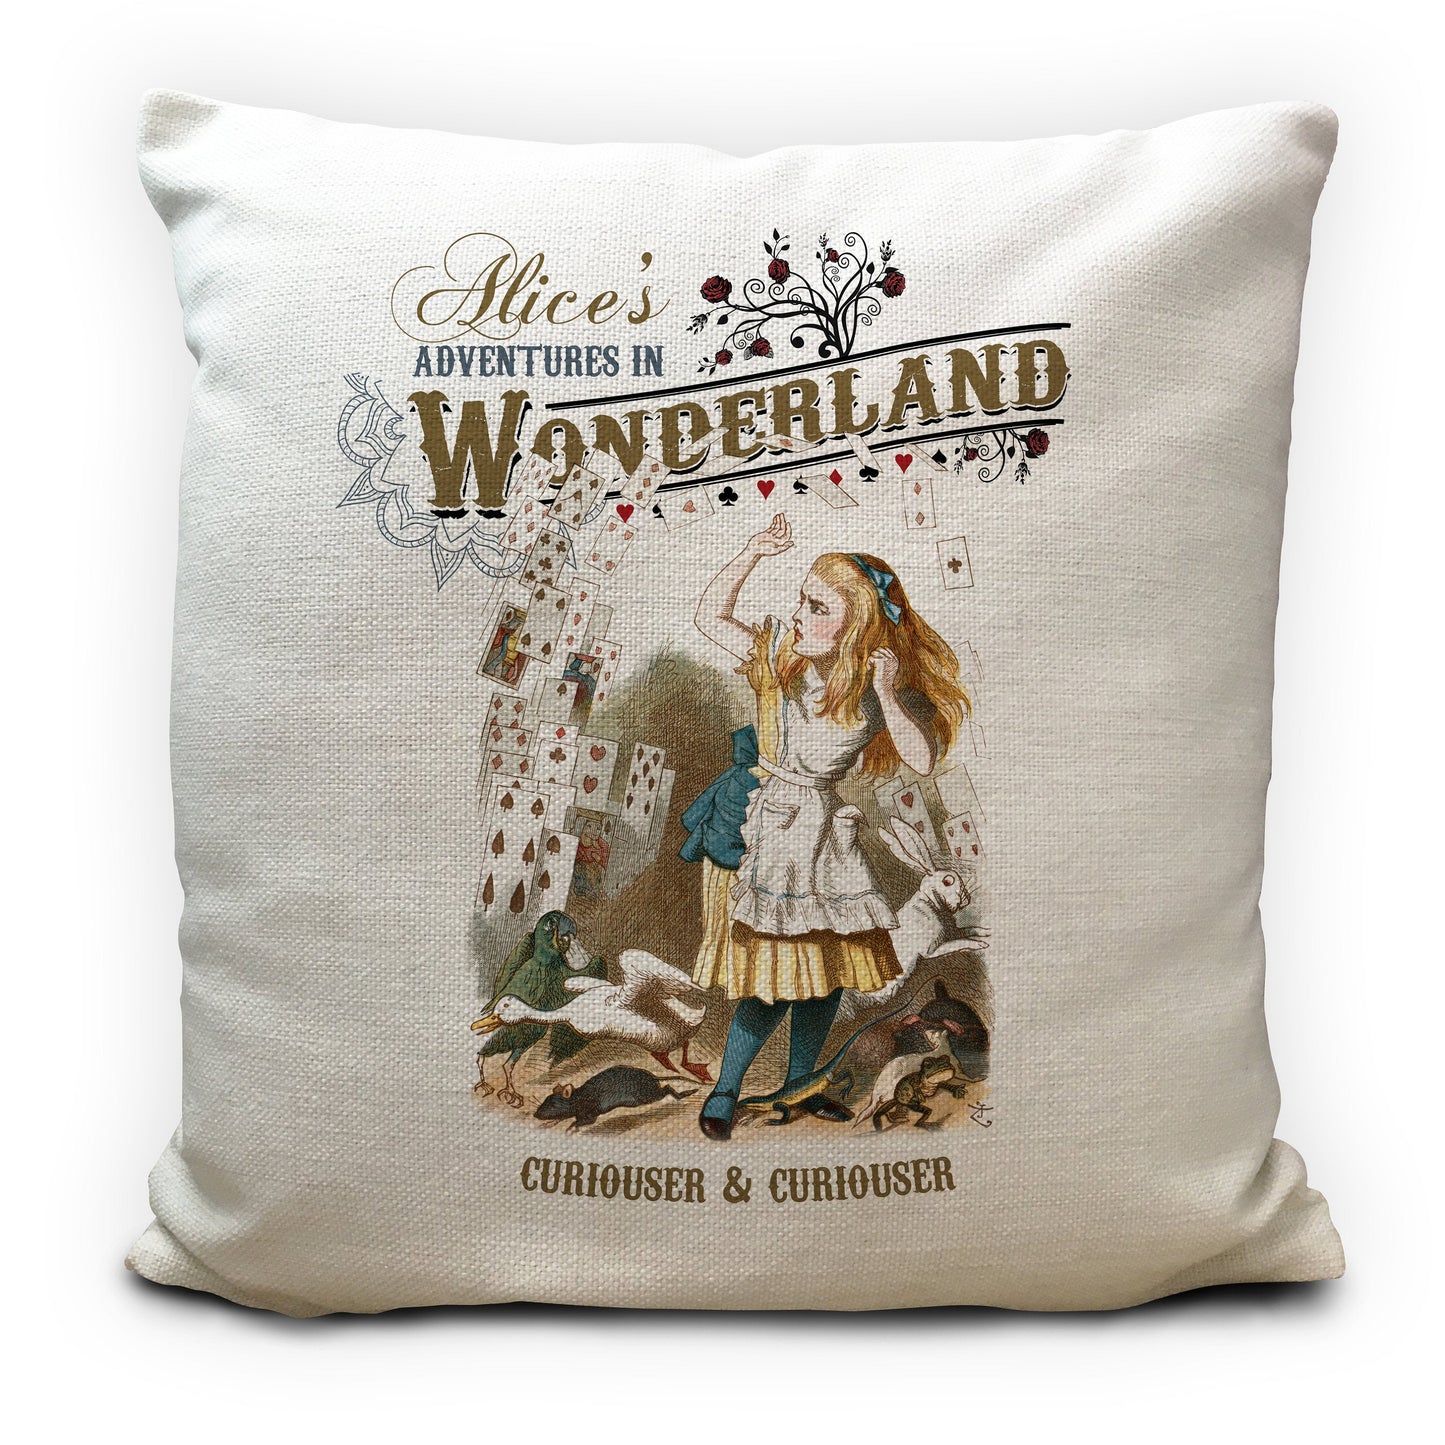 Alice in wonderland cushion cover with flying playing card illustration and curiouser quote